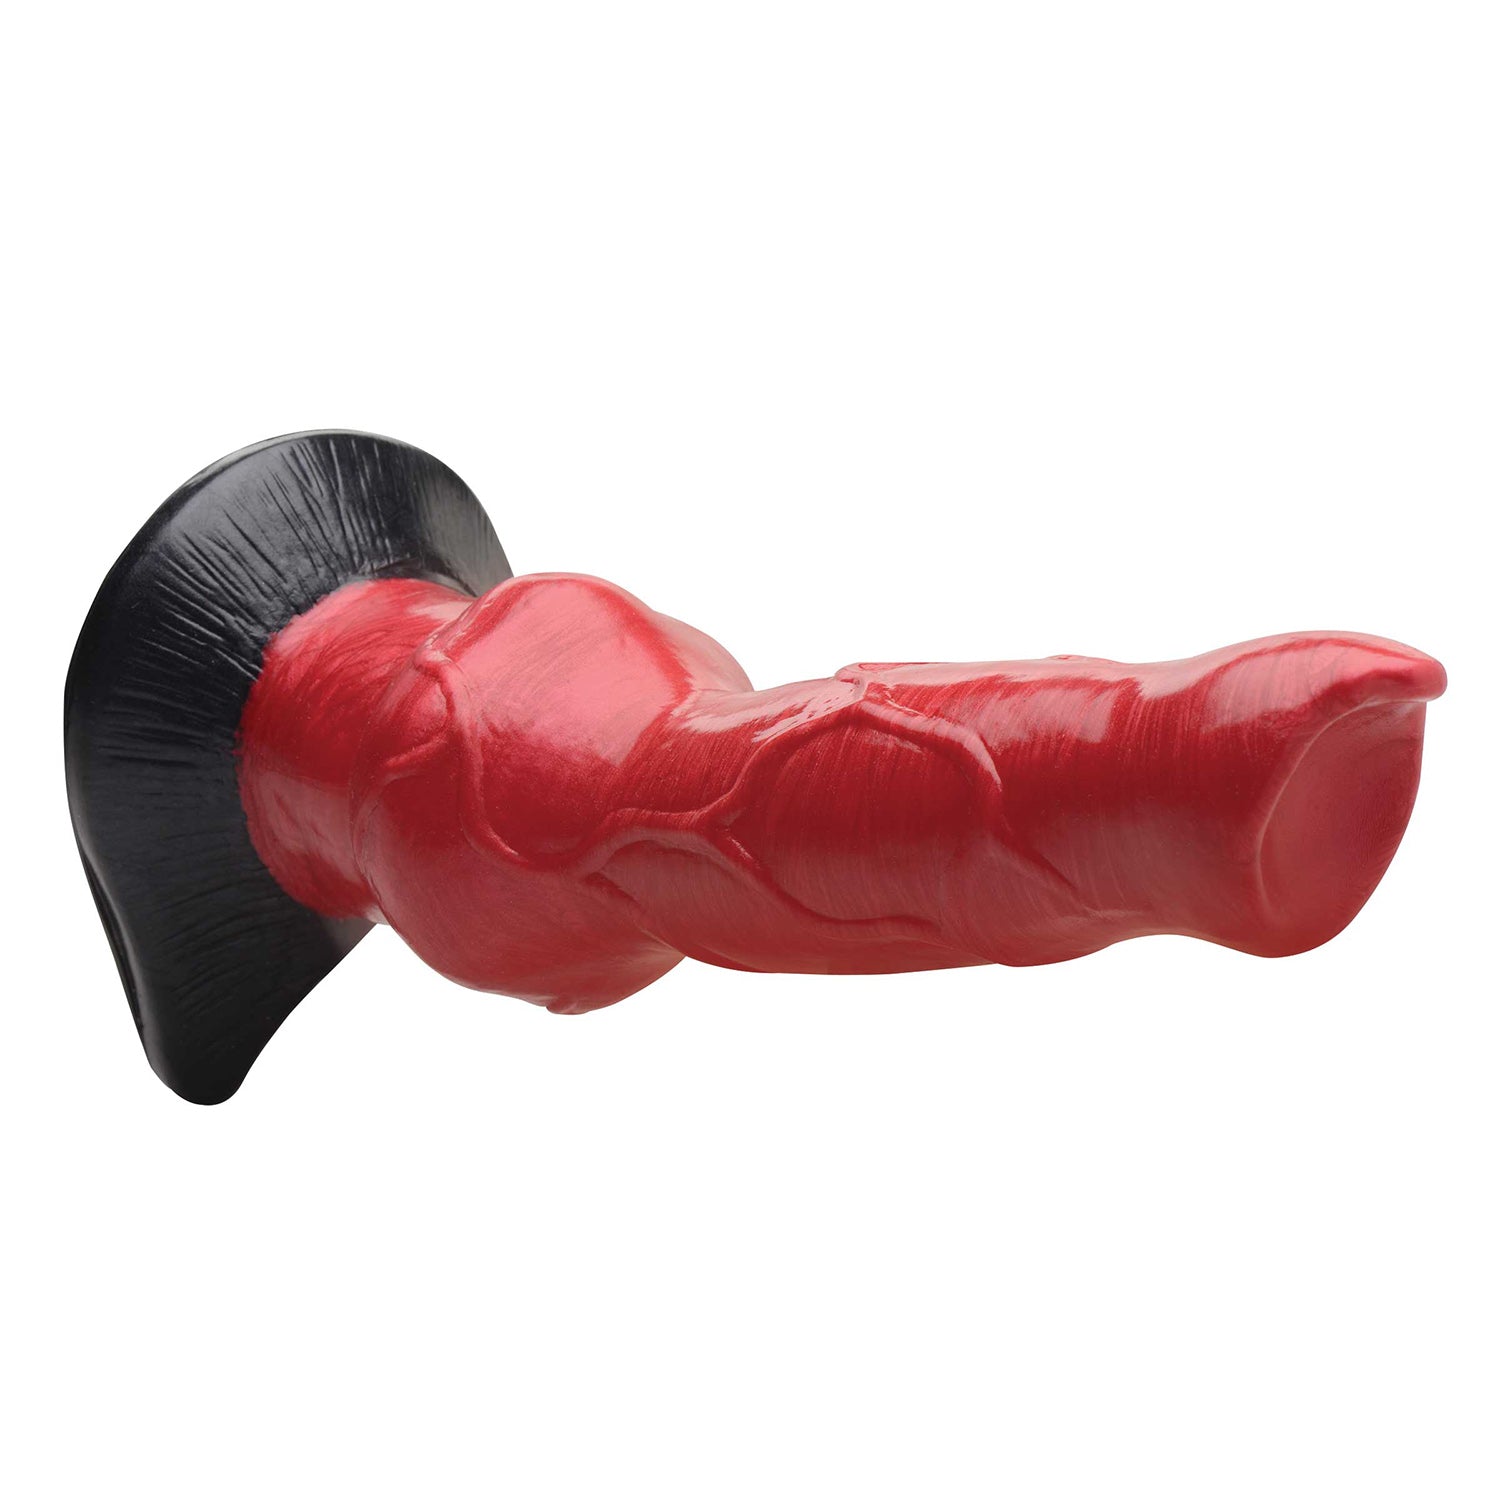 Hell-Hound Canine Penis Silicone Creature Dildo - Thorn & Feather Sex Toy Canada